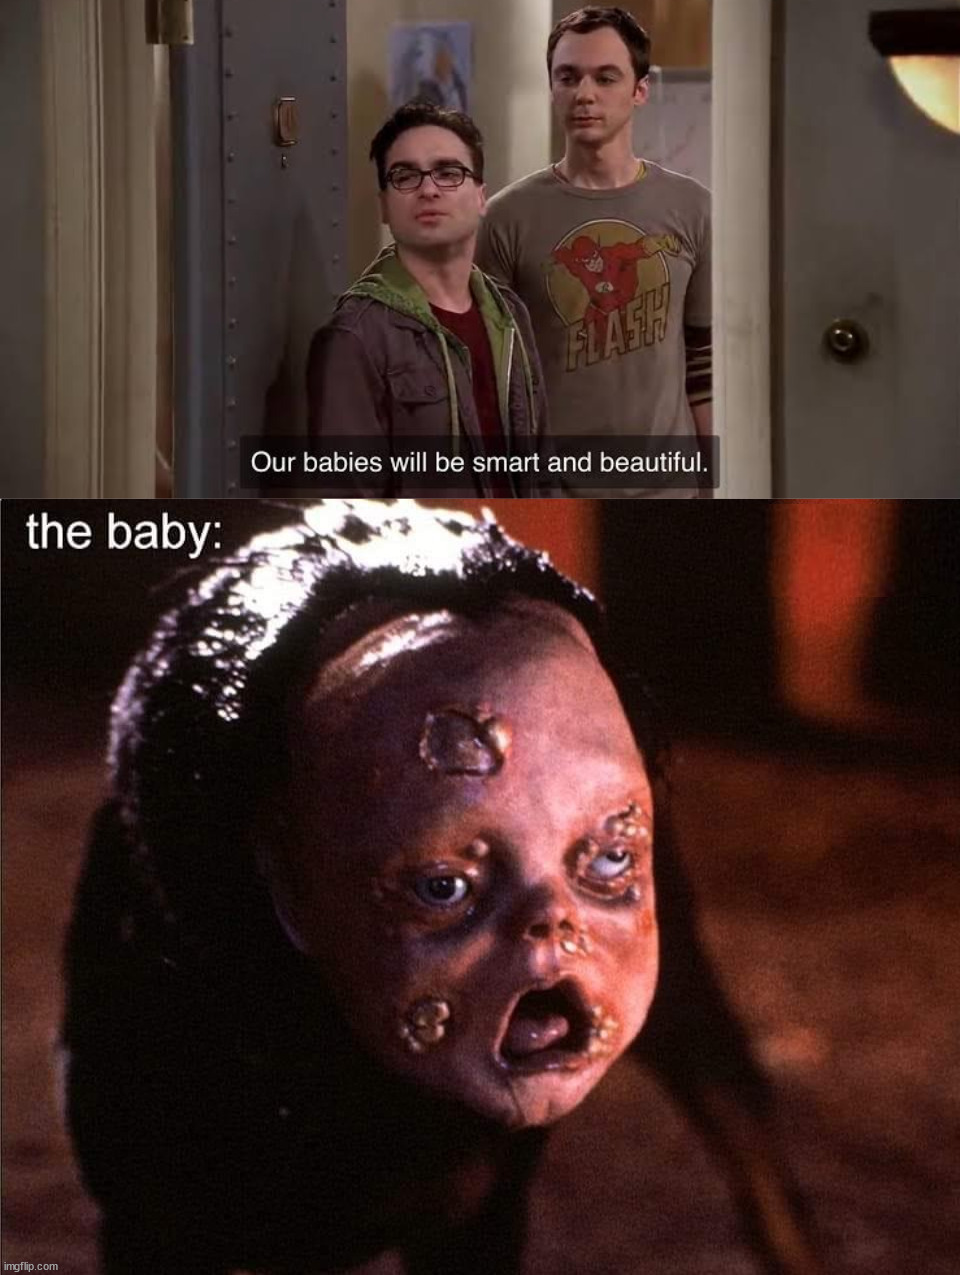 image tagged in our babies will be smart and beautiful,cursed image | made w/ Imgflip meme maker